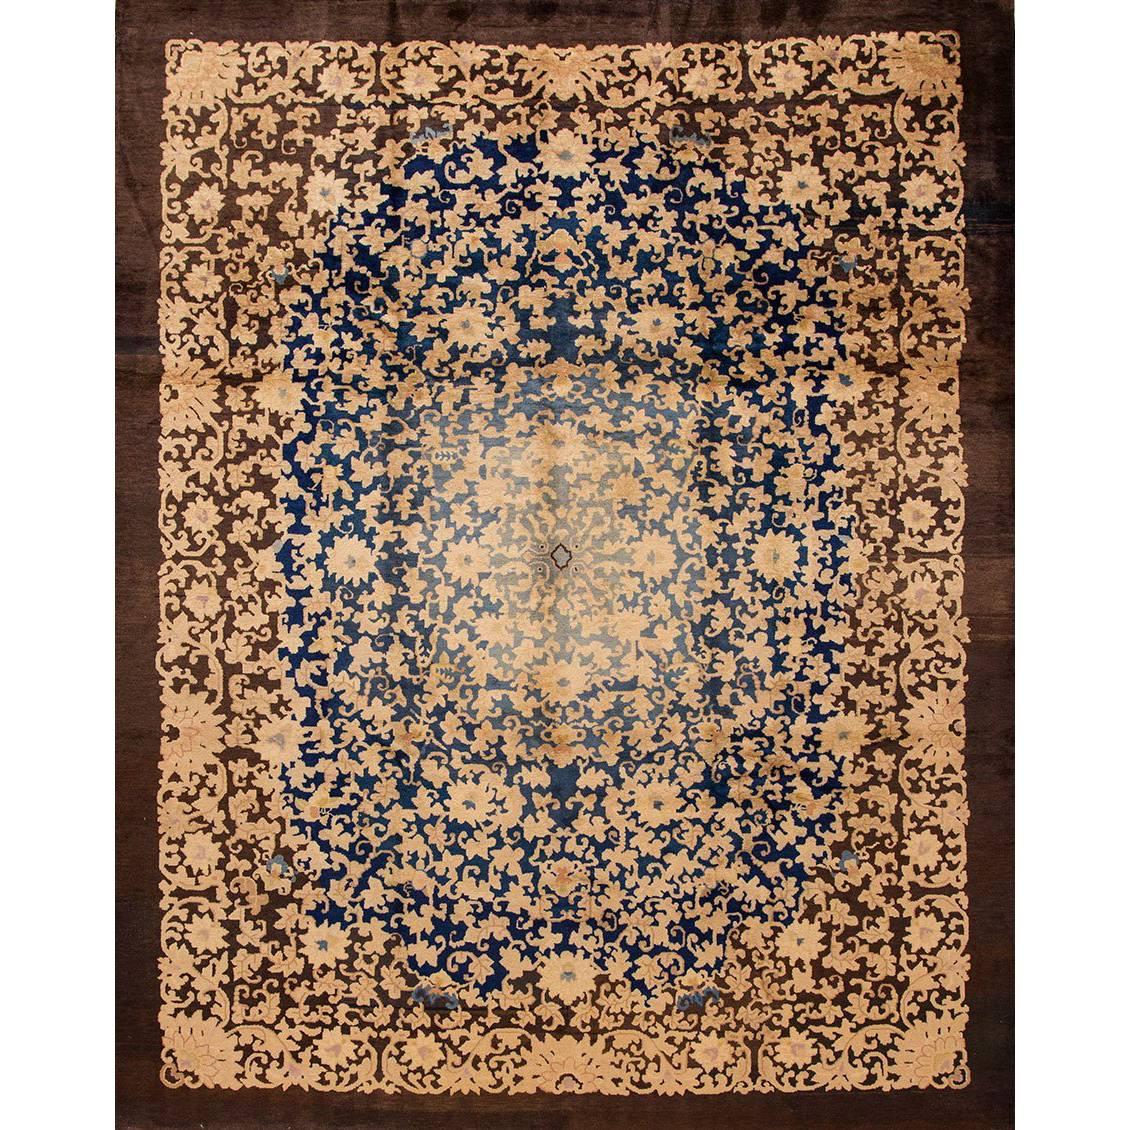 Vintage 1920s Brown and Blue Chinese Art Deco Fette Rug For Sale